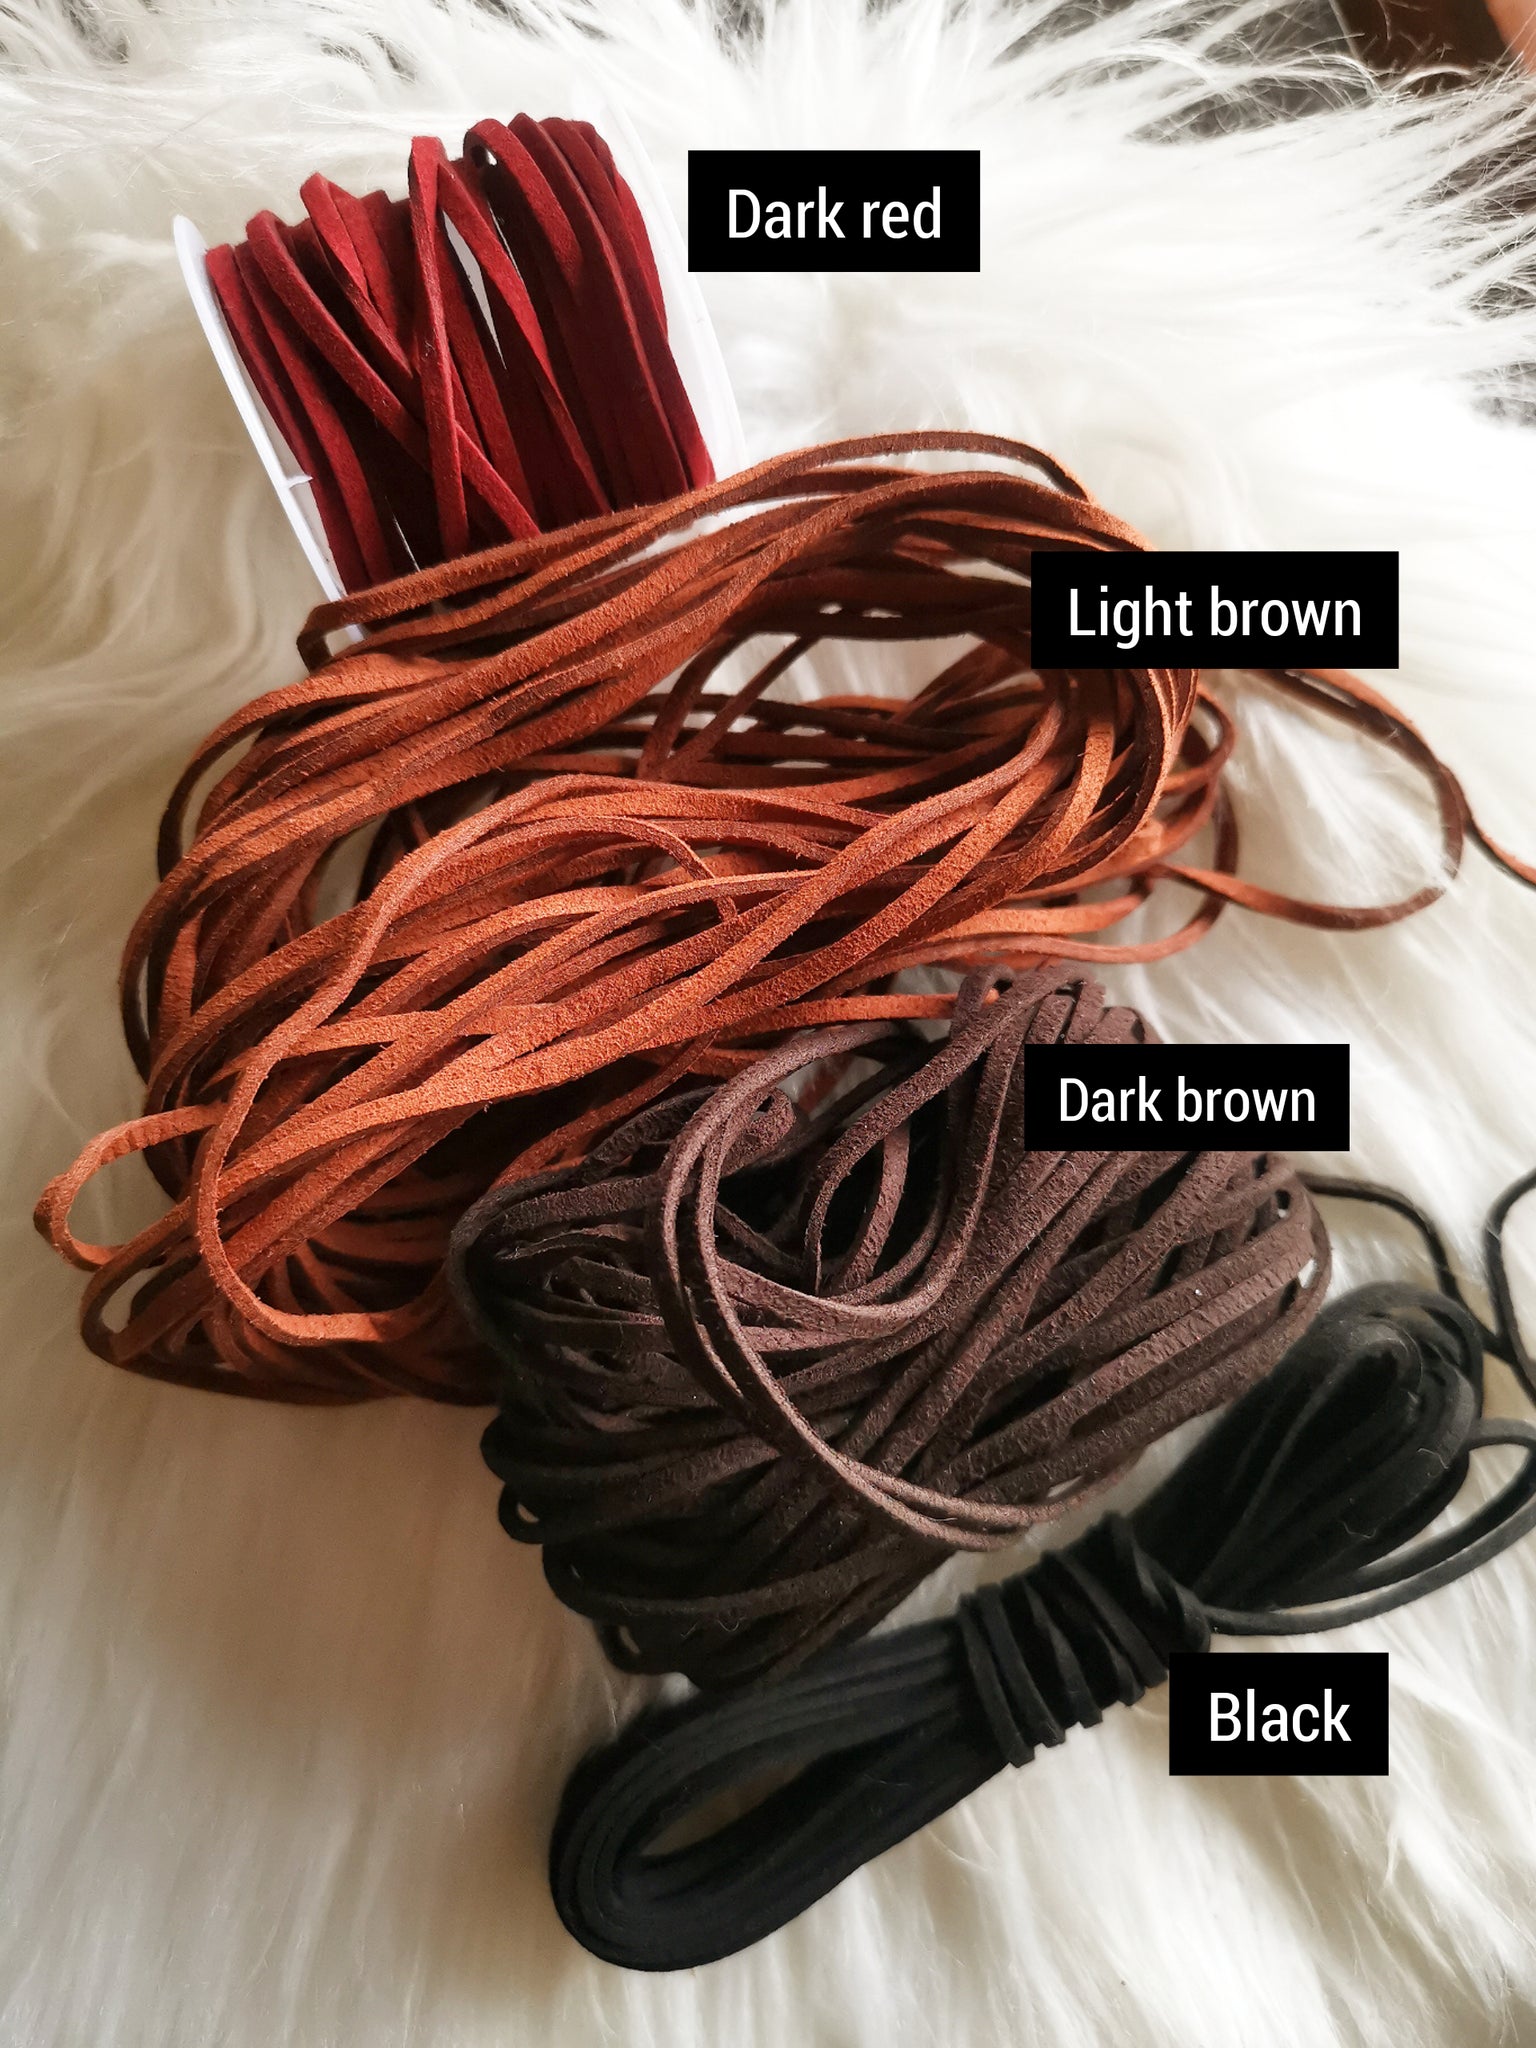 Replace chain for a vegan faux suede cord or a cotton cord